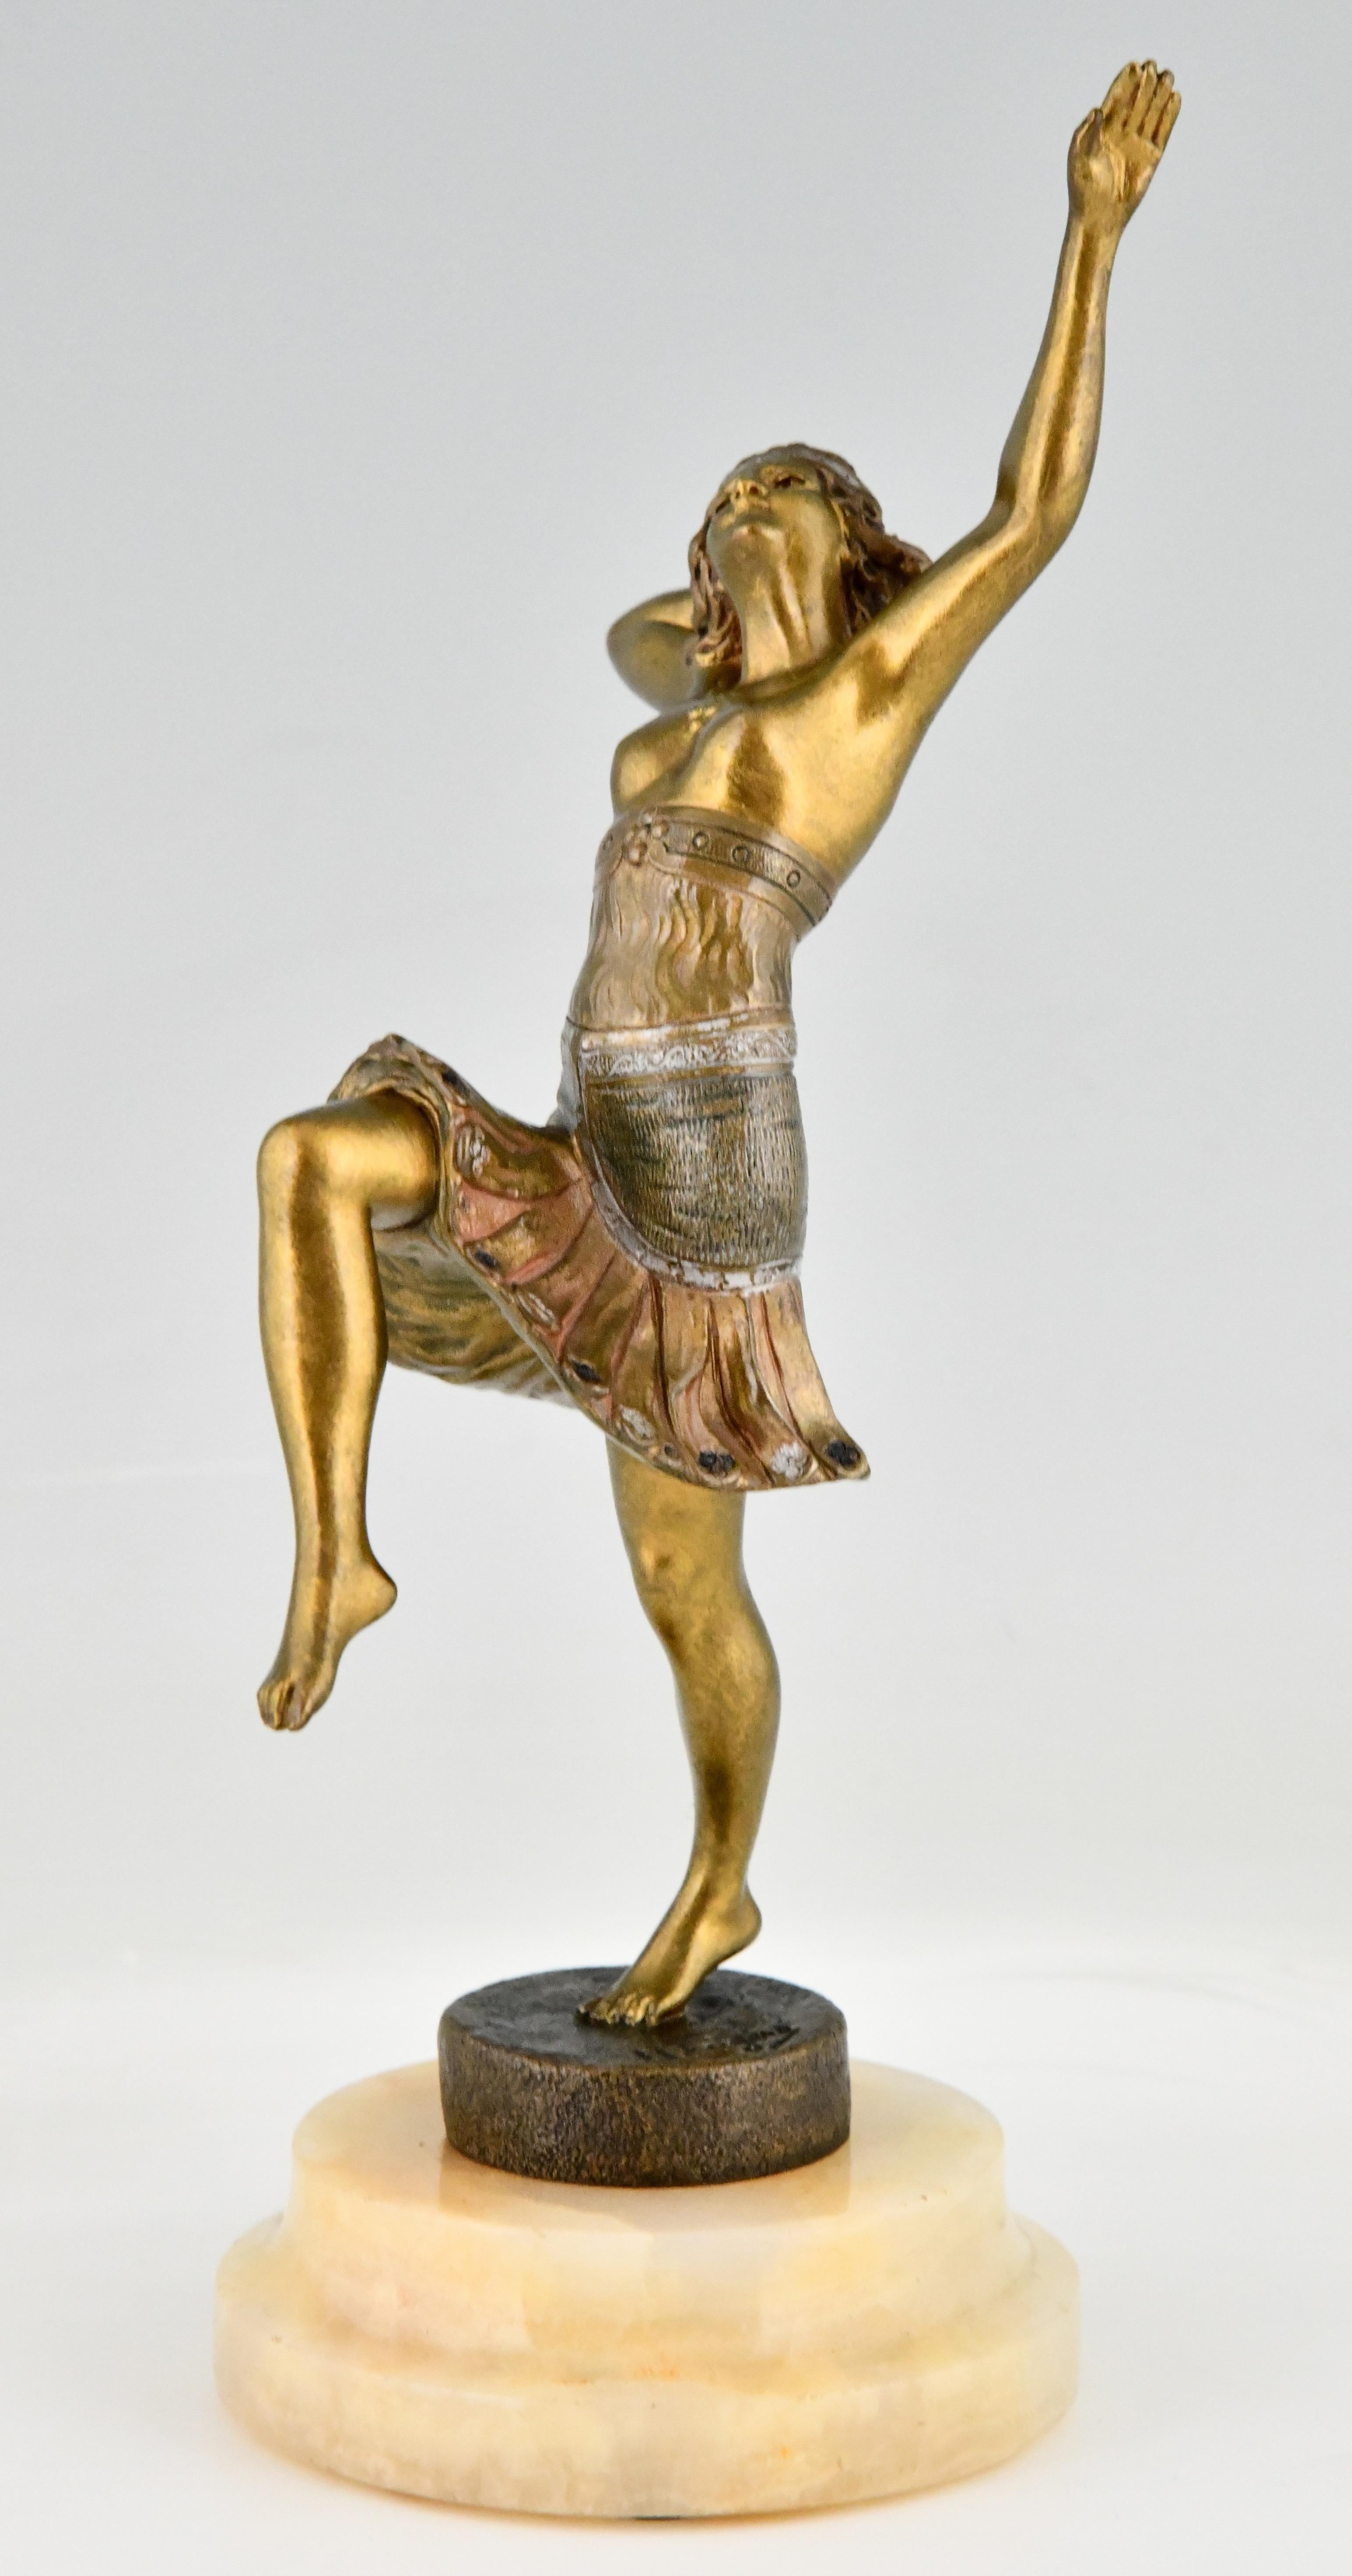 Patinated Art Deco Bronze Sculpture of a Dancer Signed by Henry Fugère 1925